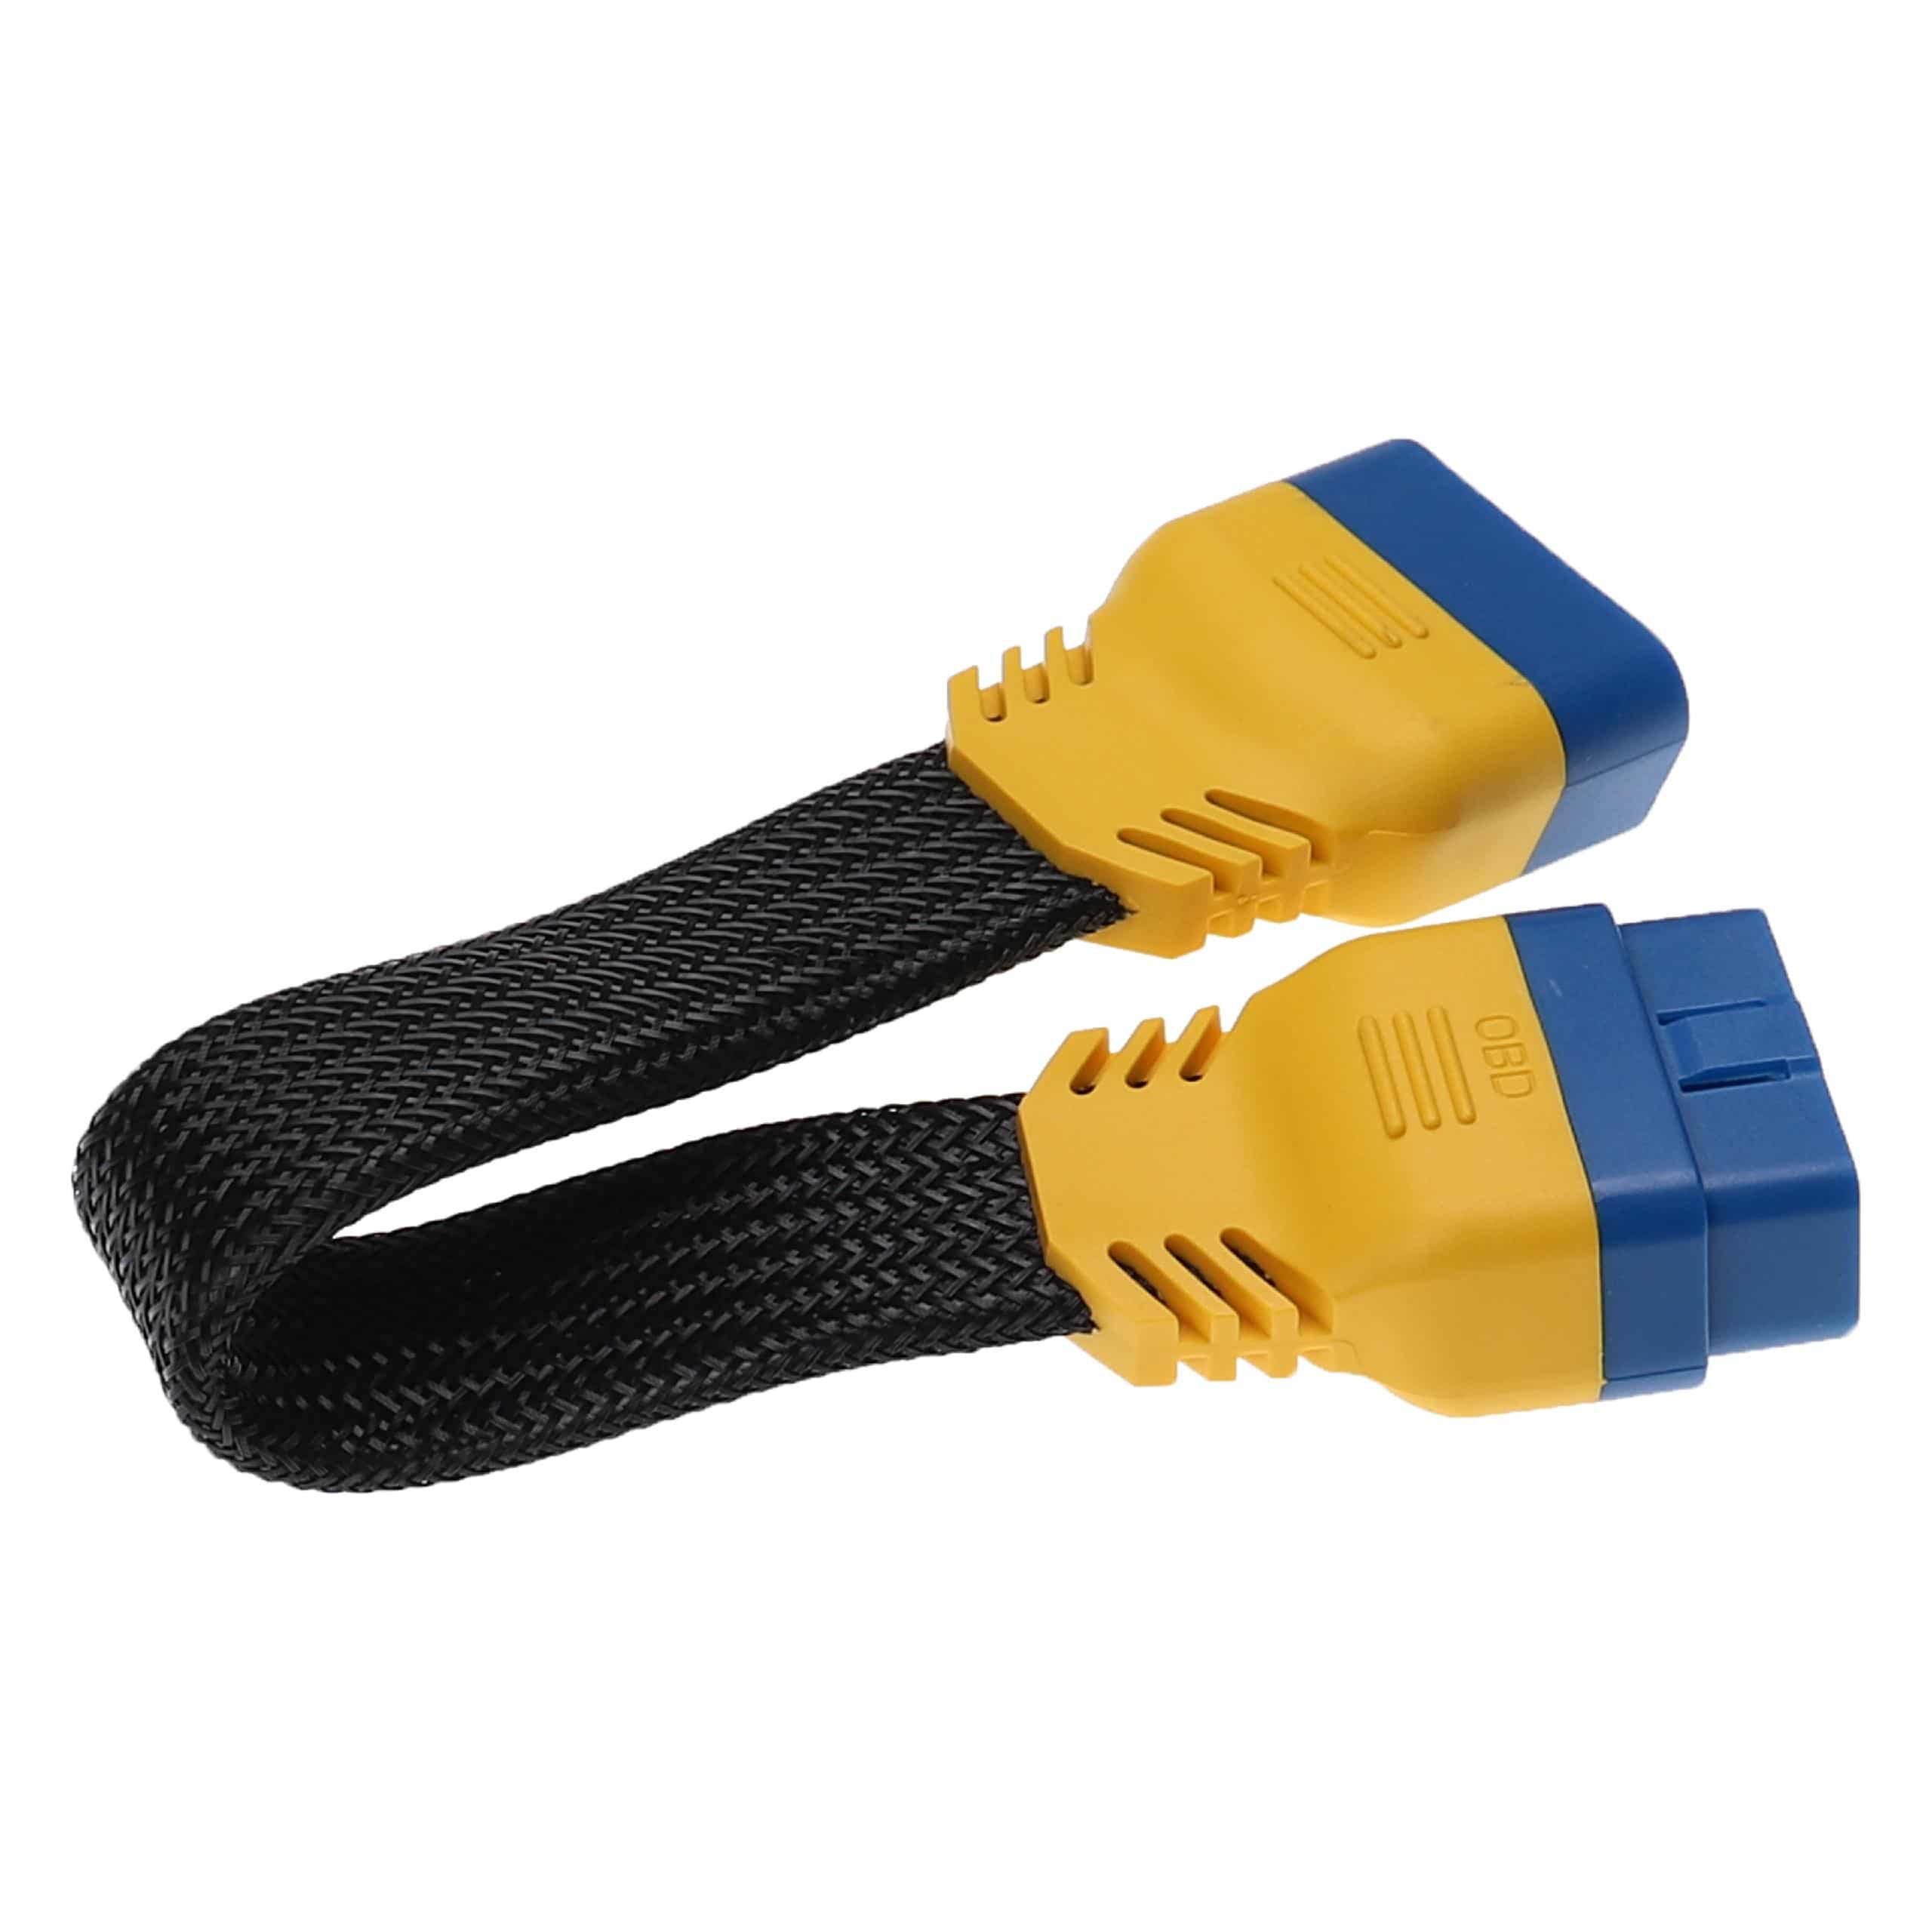 vhbw OBD2 Extension Cable 16 Pin (f) to 16 Pin (m) for LKW, Car, Vehicle - 30 cm